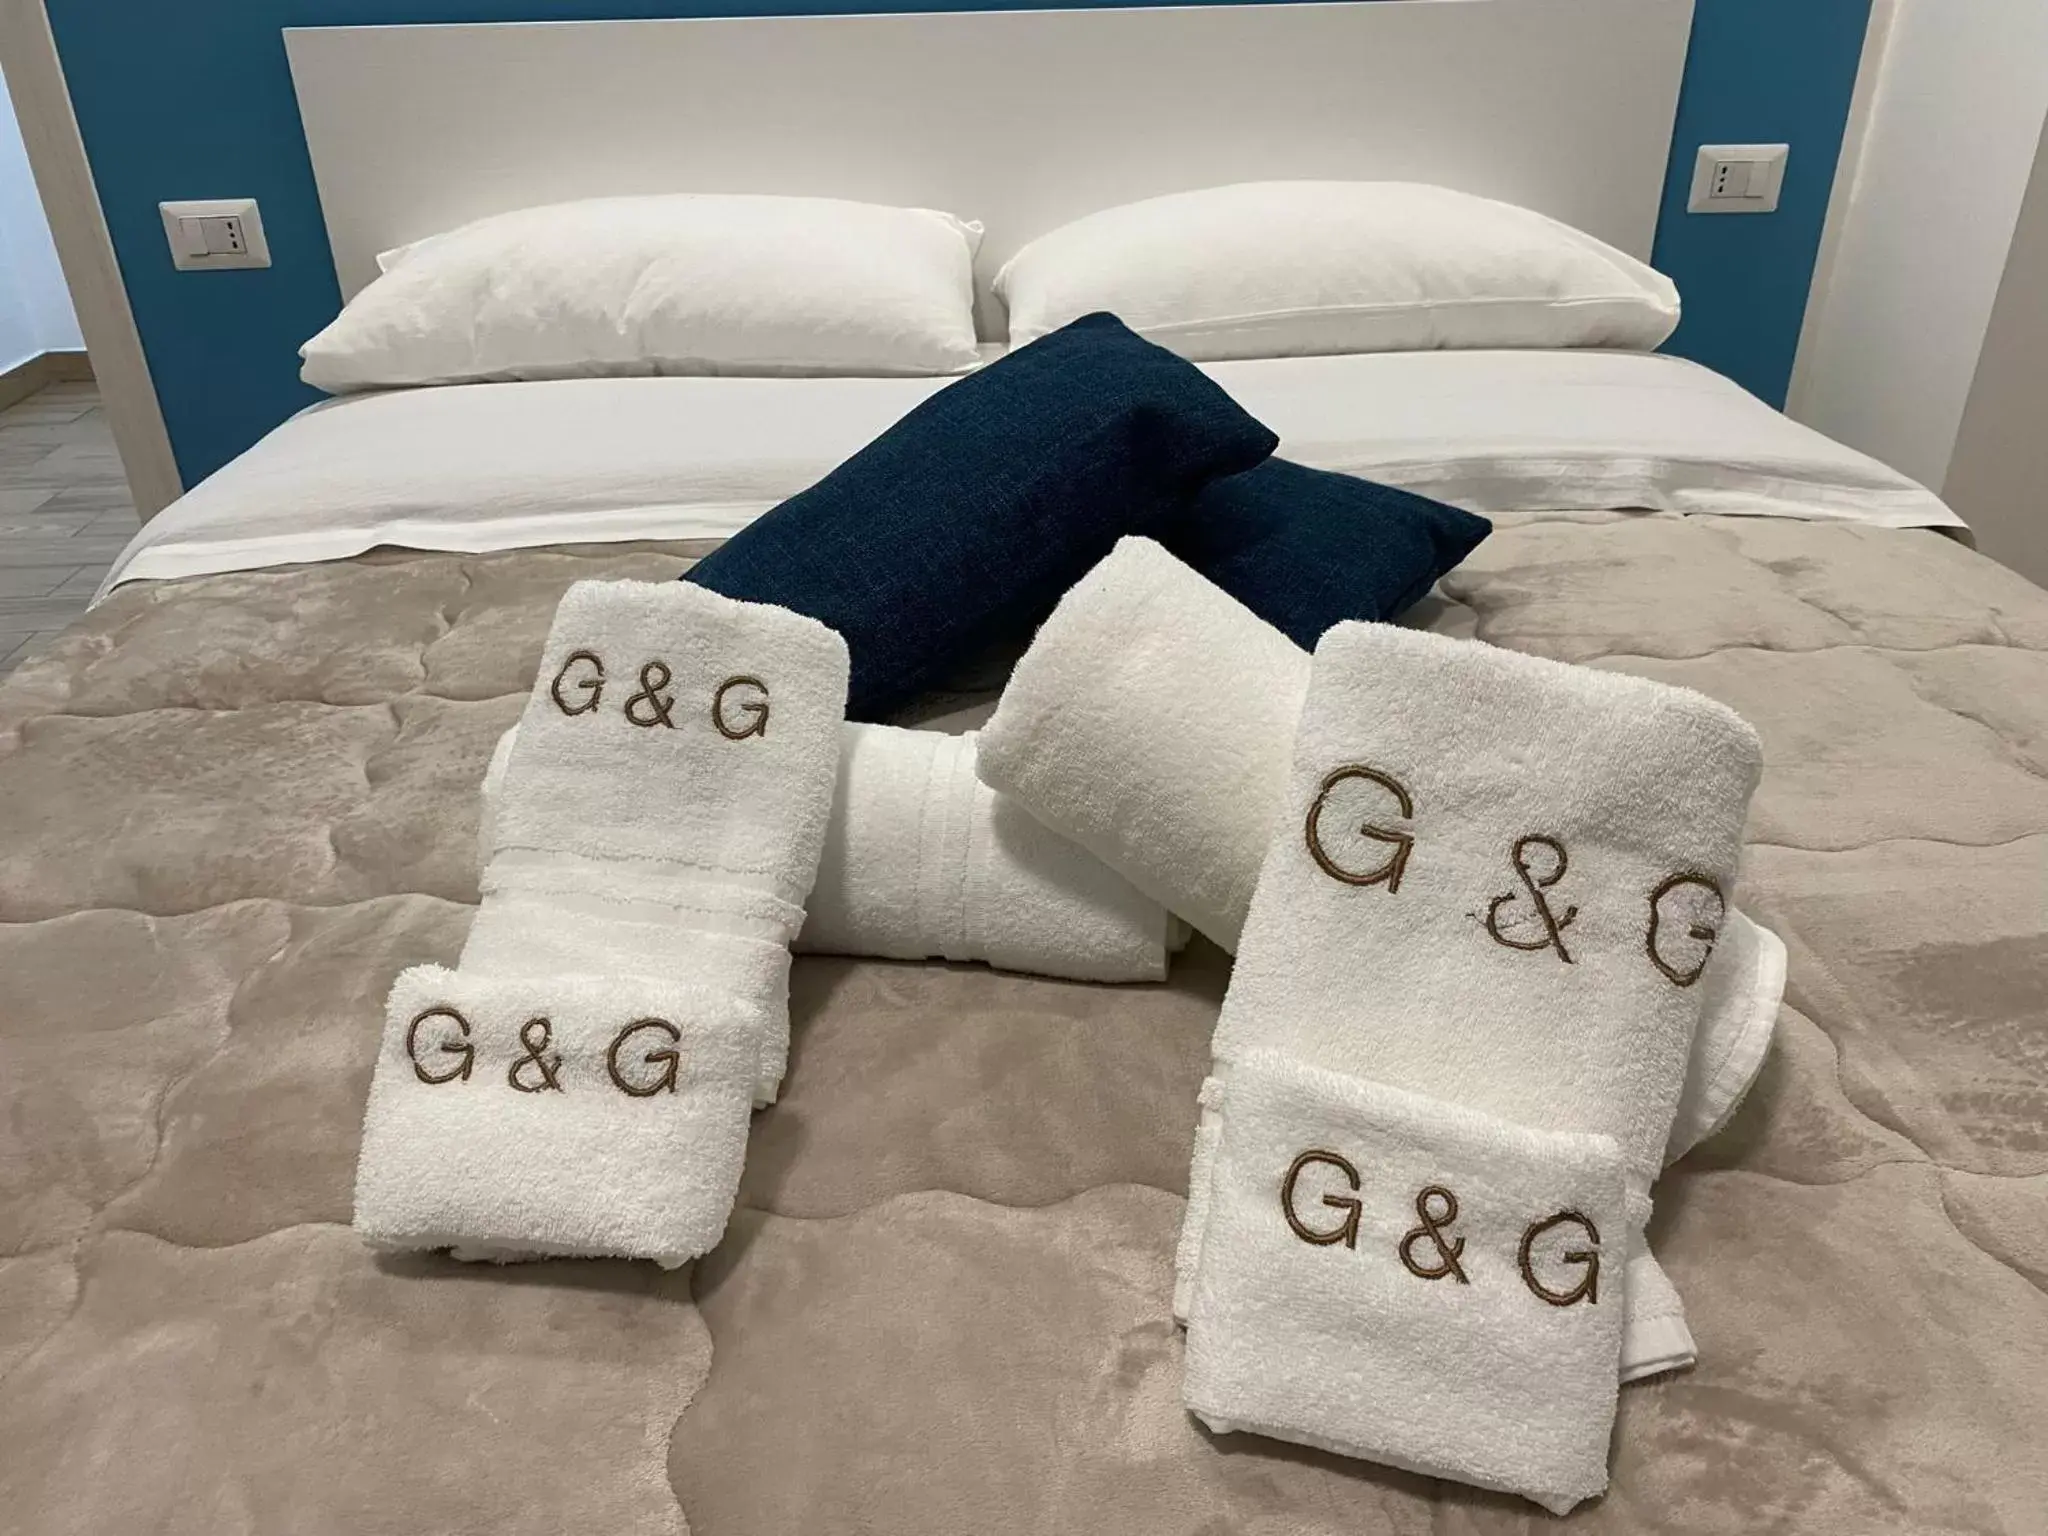 Bed in G&G Home